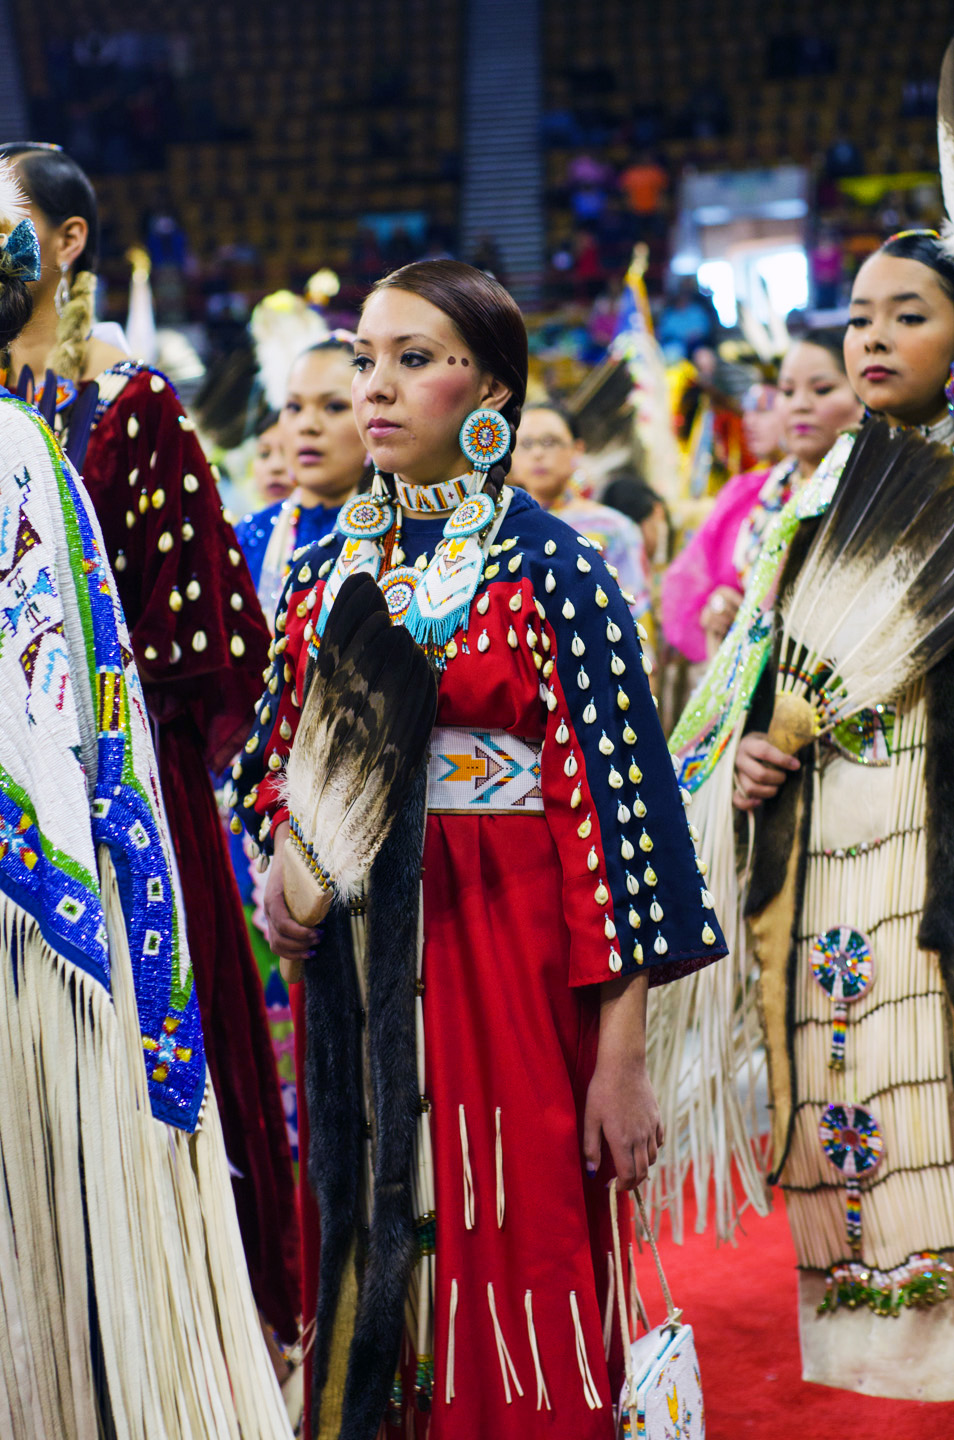 Southern Ute tribal member Brianna Goodtracks-Alires adorns a shell dress during a grand entry.